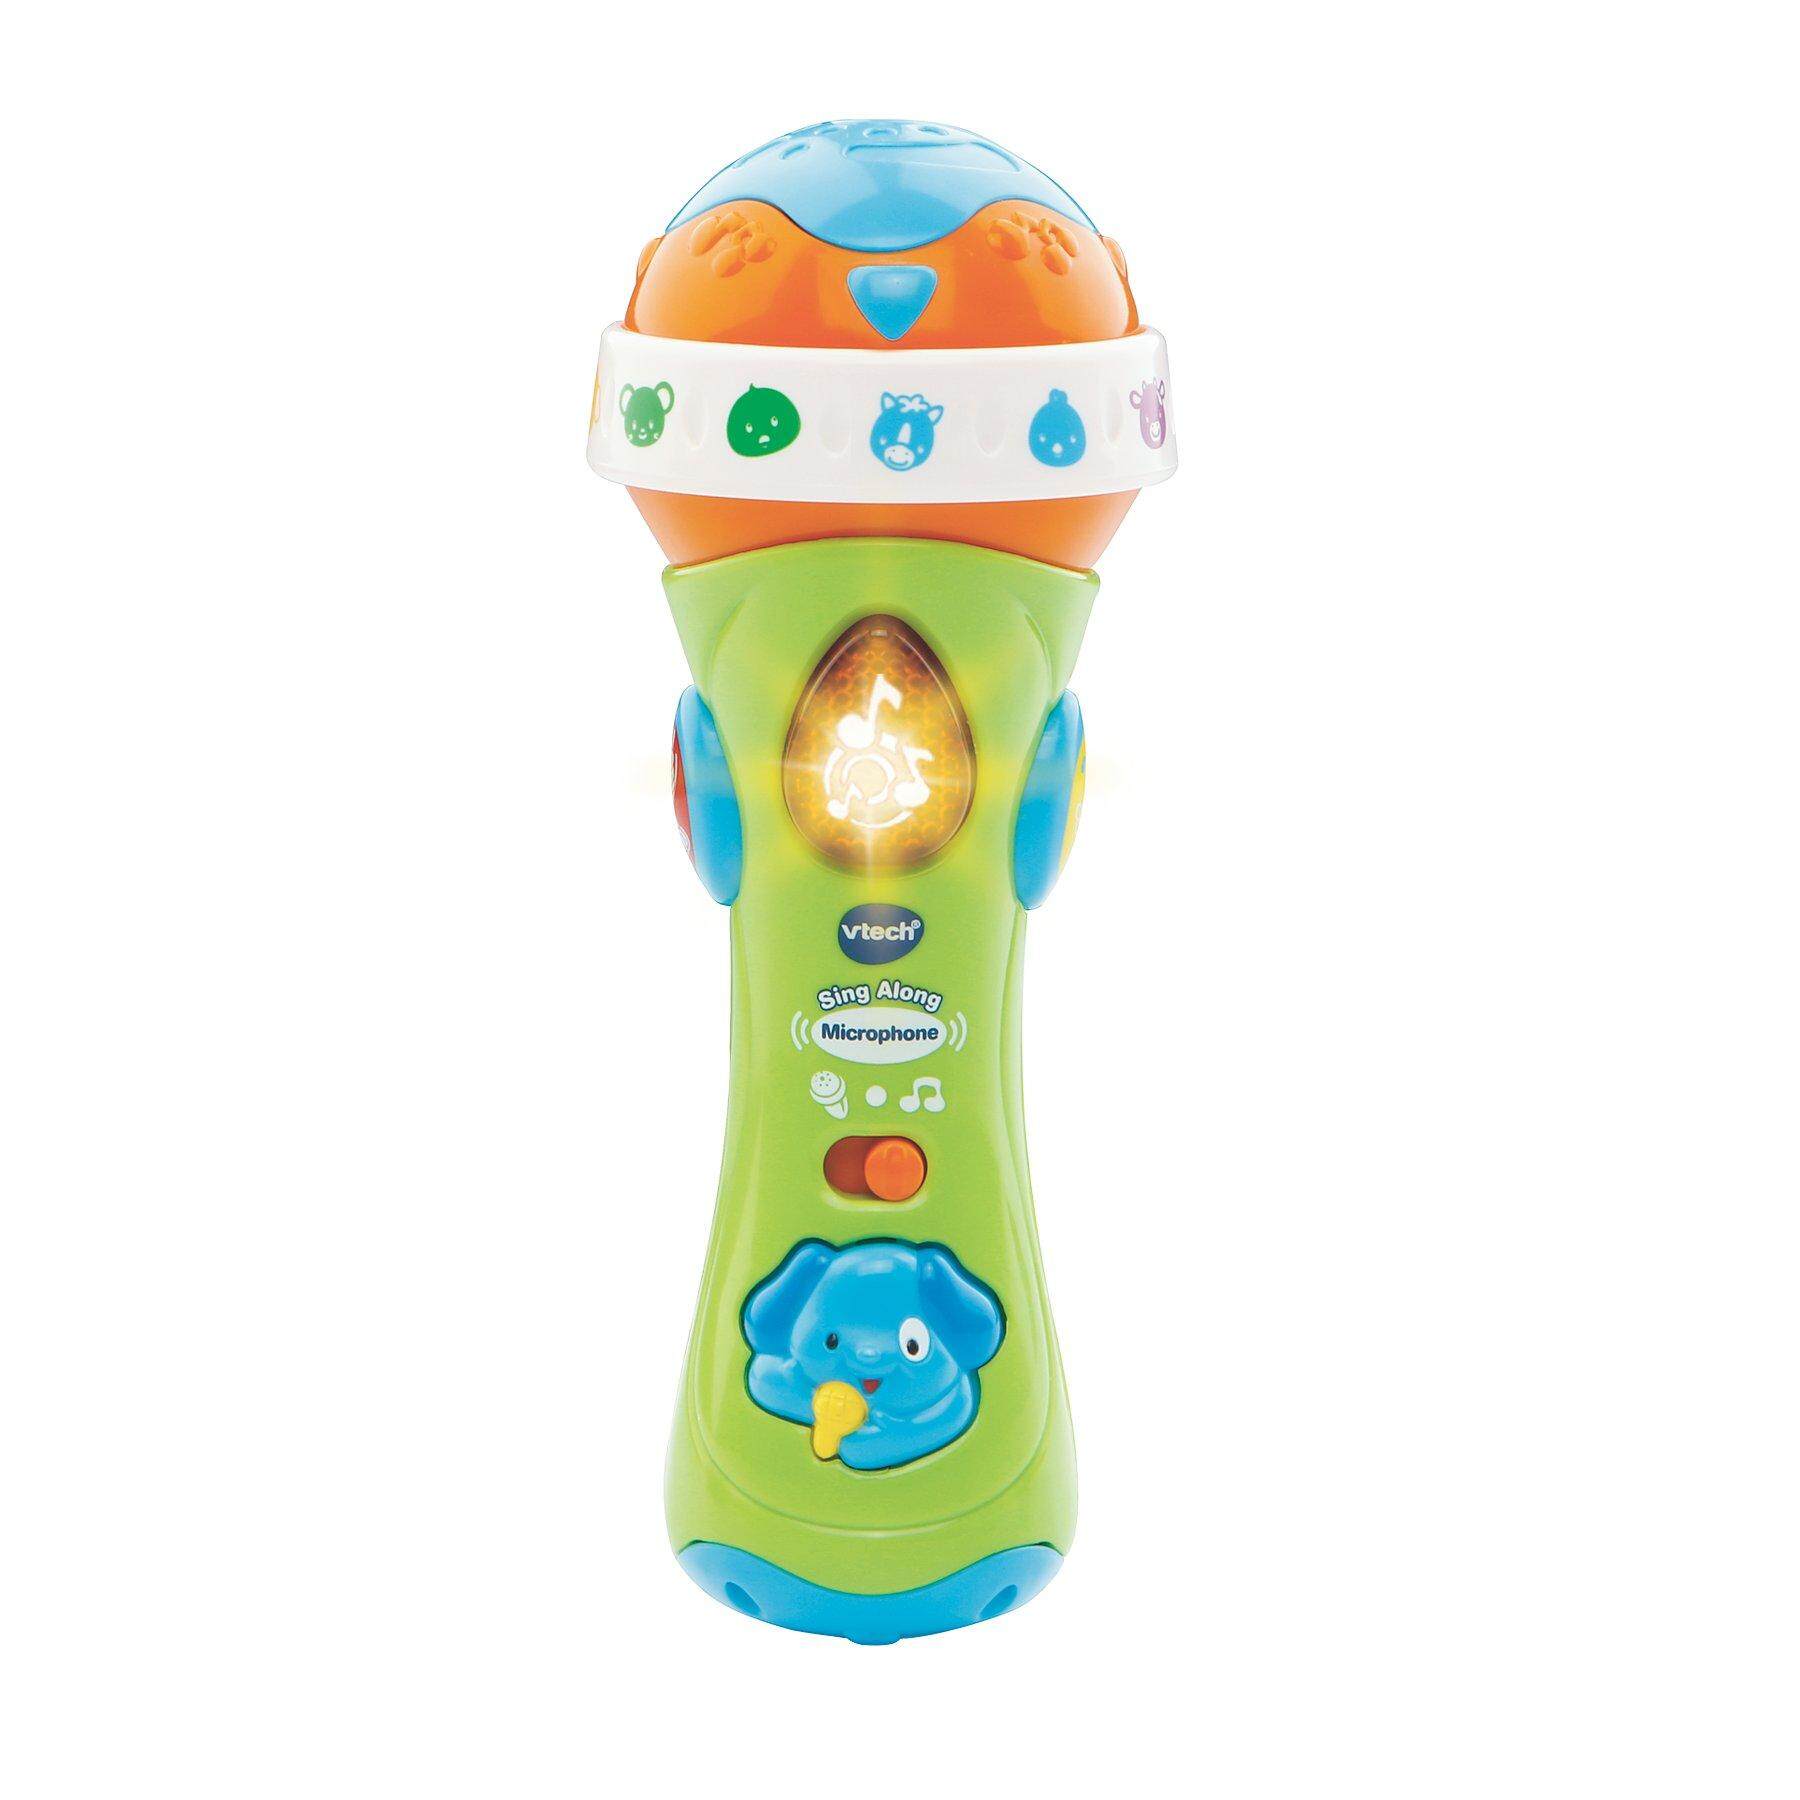 Sing Along Microphone